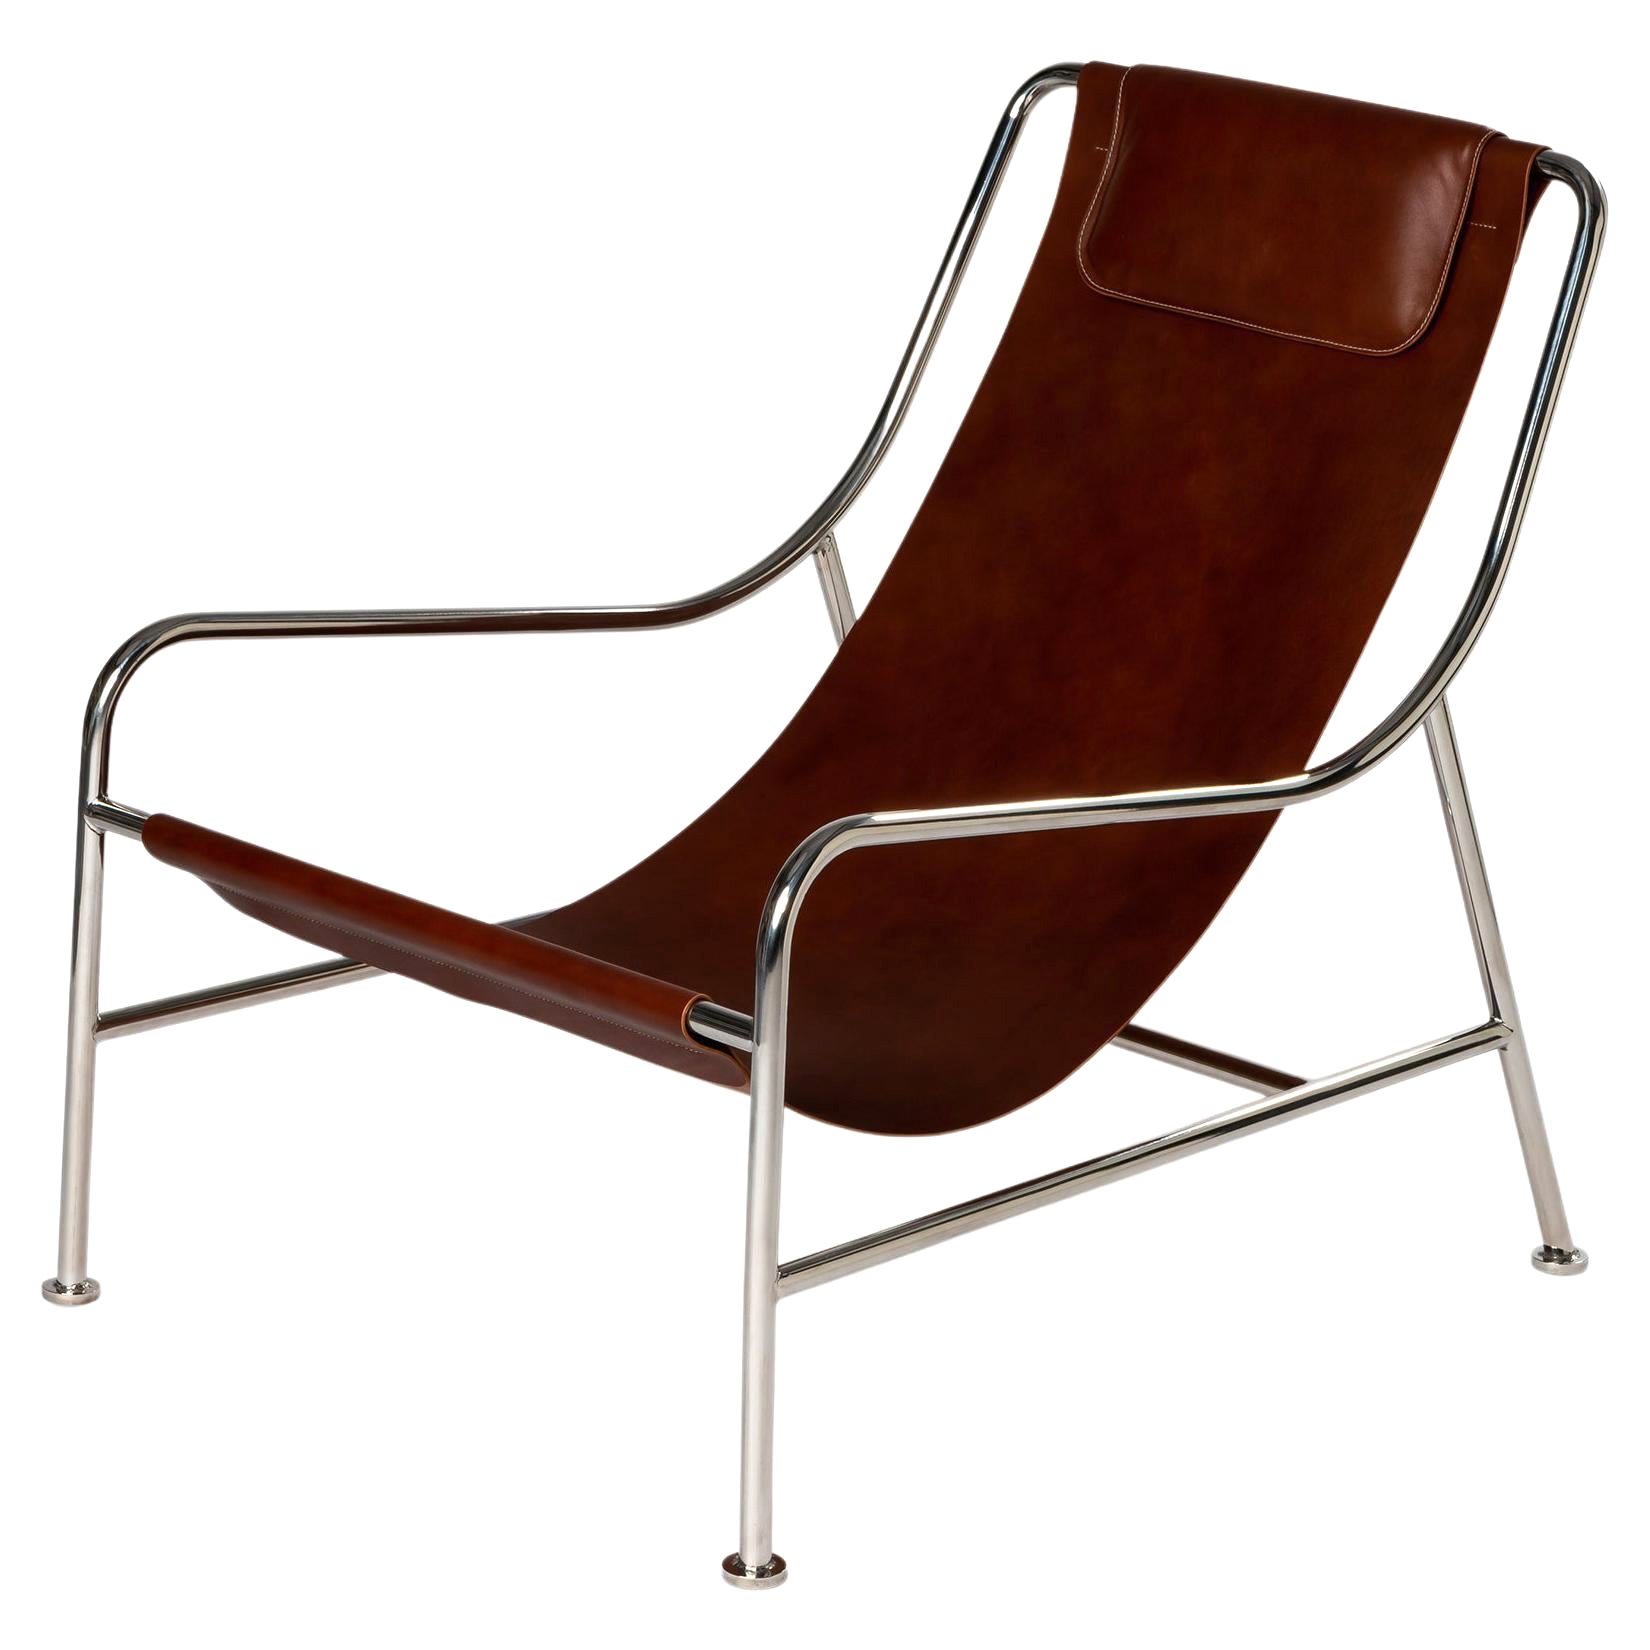 Minimalist Modern Lounge Chair in Brown Leather and Polished Stainless Steel For Sale